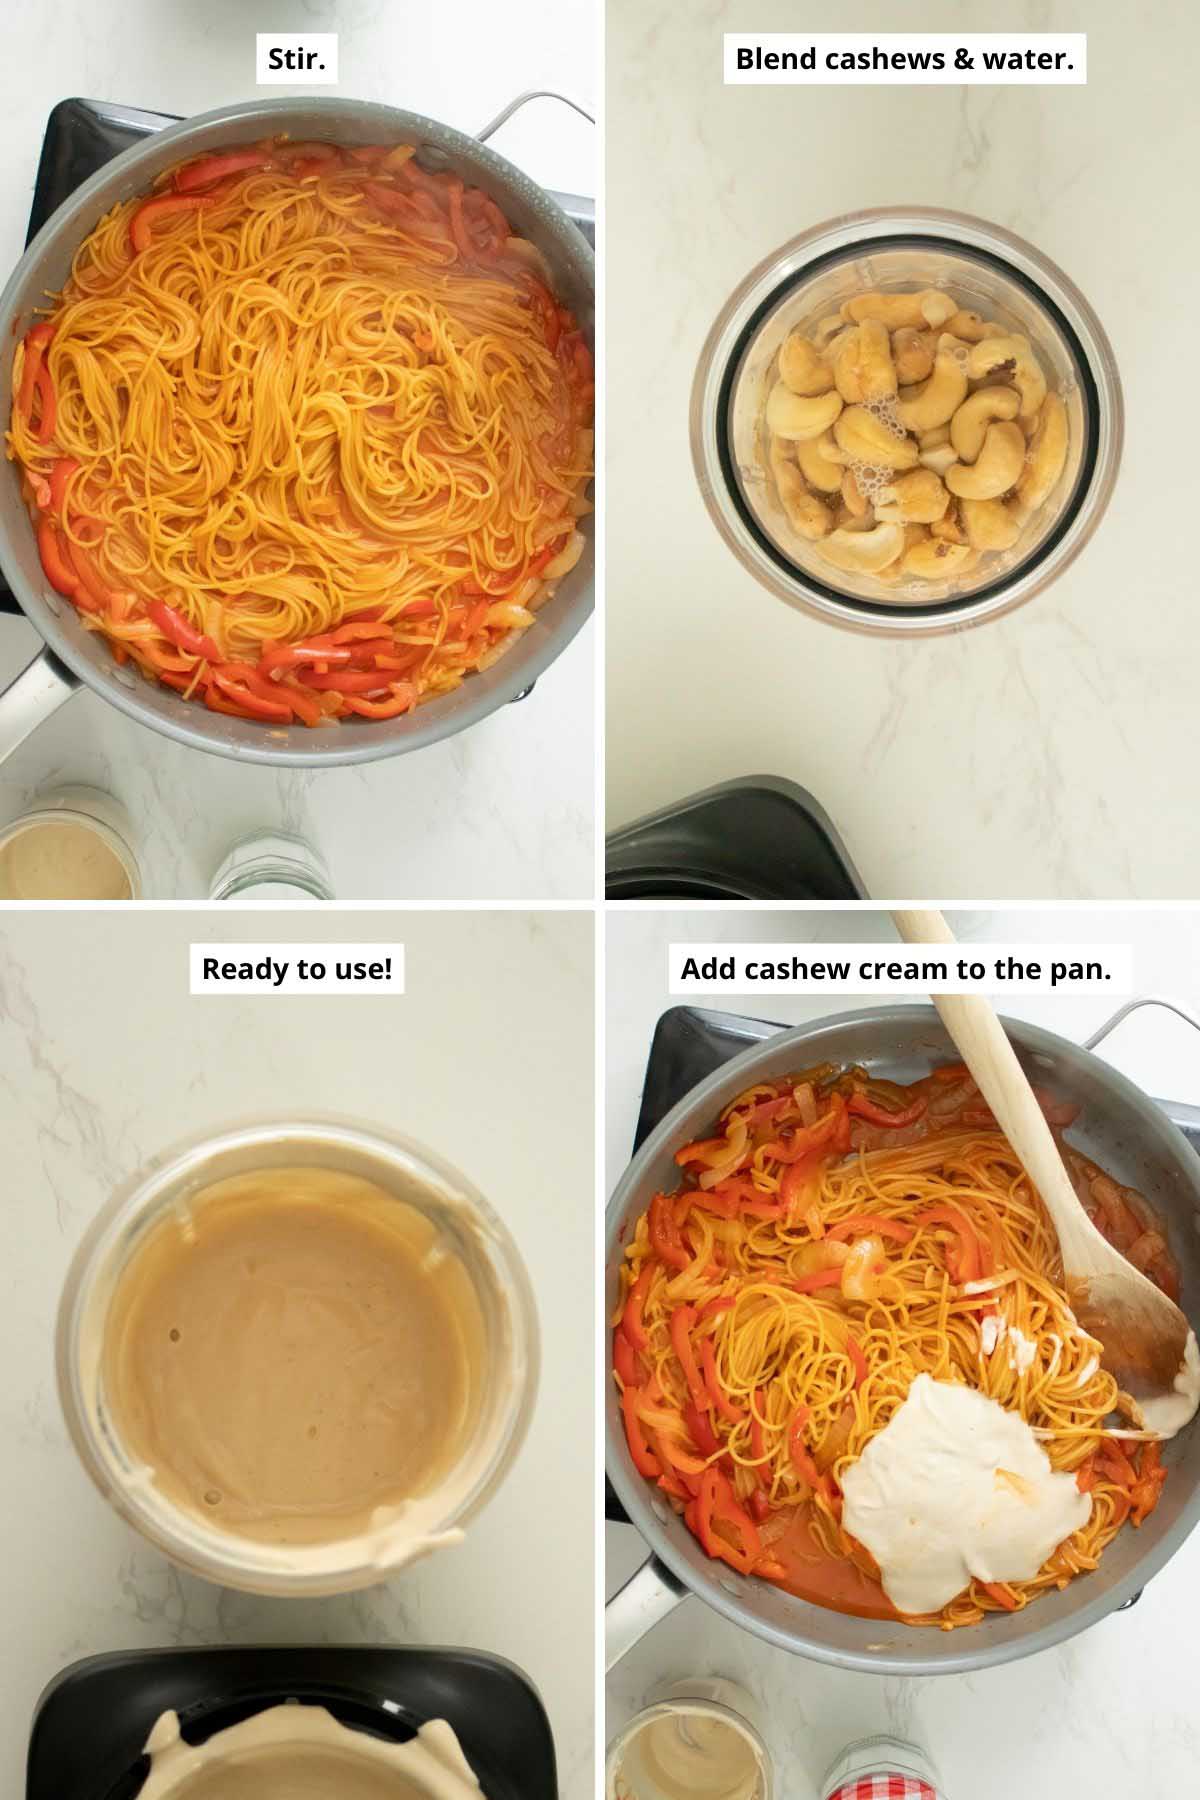 image collage showing the spaghetti before and after cooking, the cashews and water before and after blending, and the cashew cream added to the pan of pasta